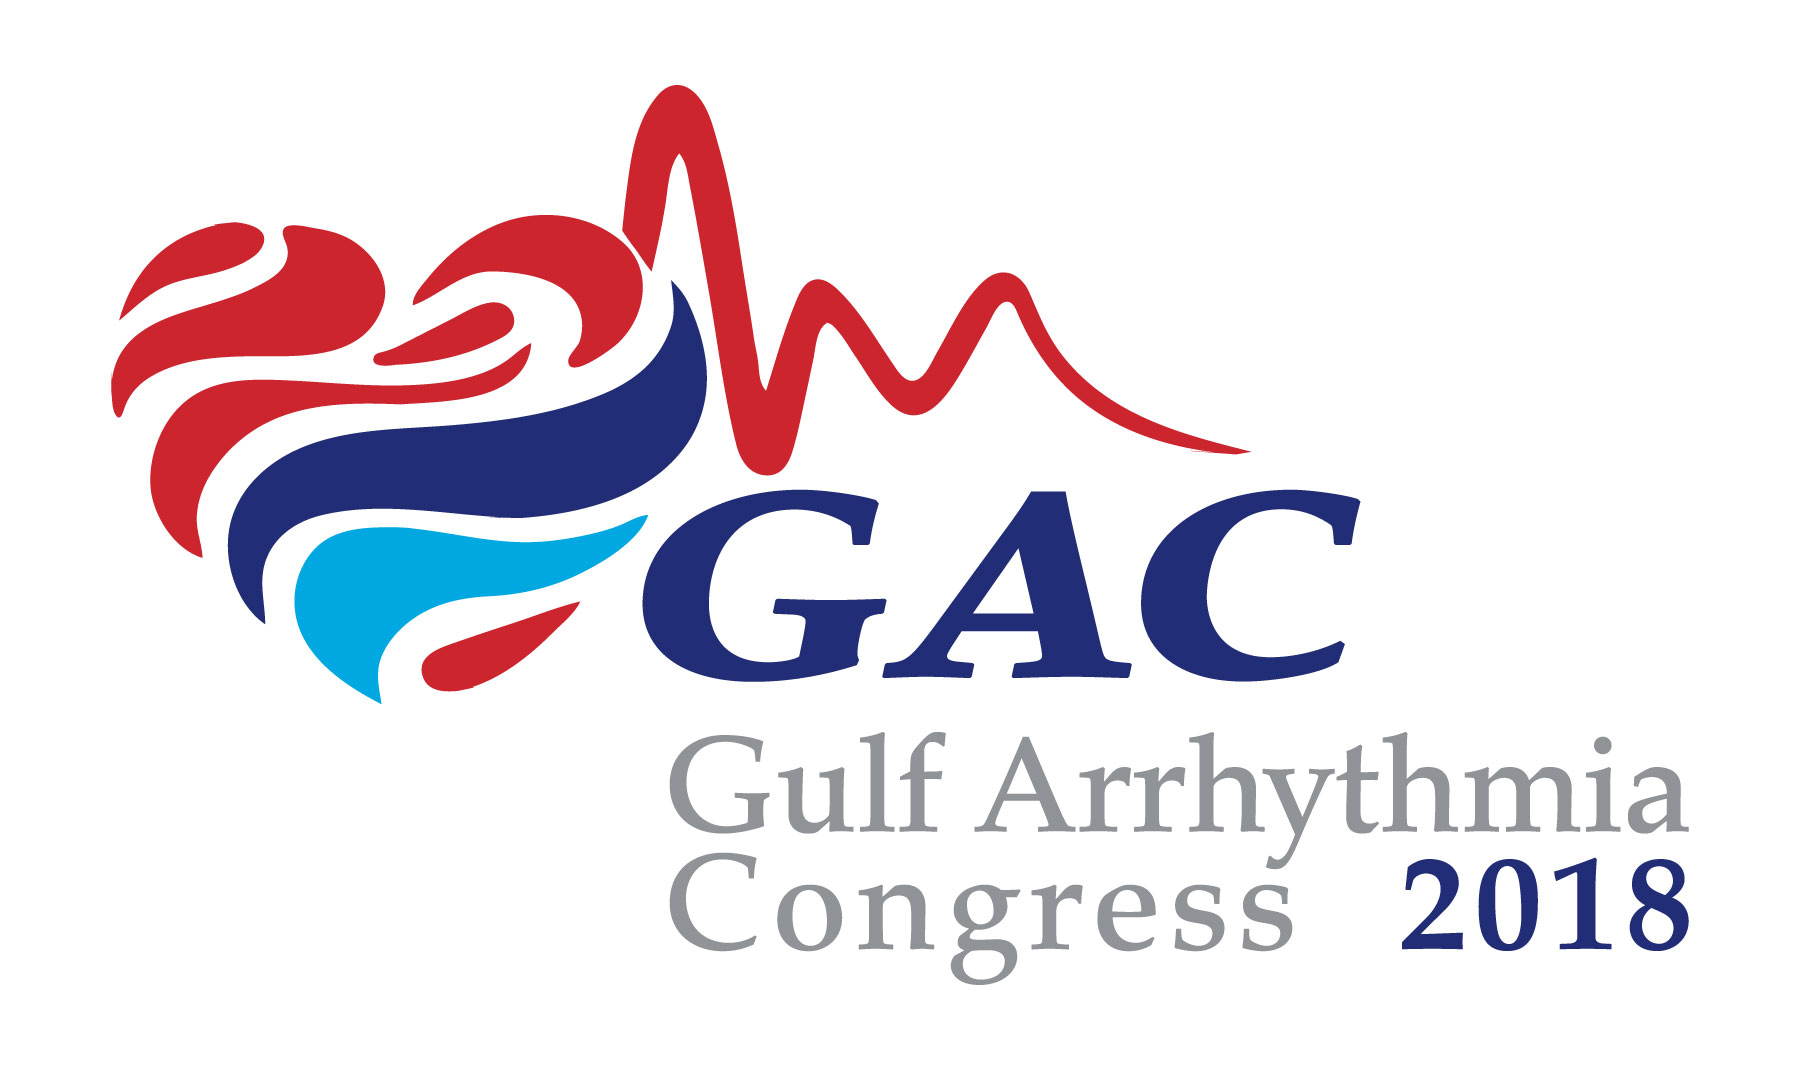 The  2018 edition of the Gulf Arrhythmia Congress, the official scientific sessions of the Saudi Heart Rhythm Society (SHRS) and Gulf Heart Rhythm Society (GHRS)  will be held in Dubai, United Arab Emirates from January 25th to 27th, 2018 at Intercontinental Hotel, Dubai.